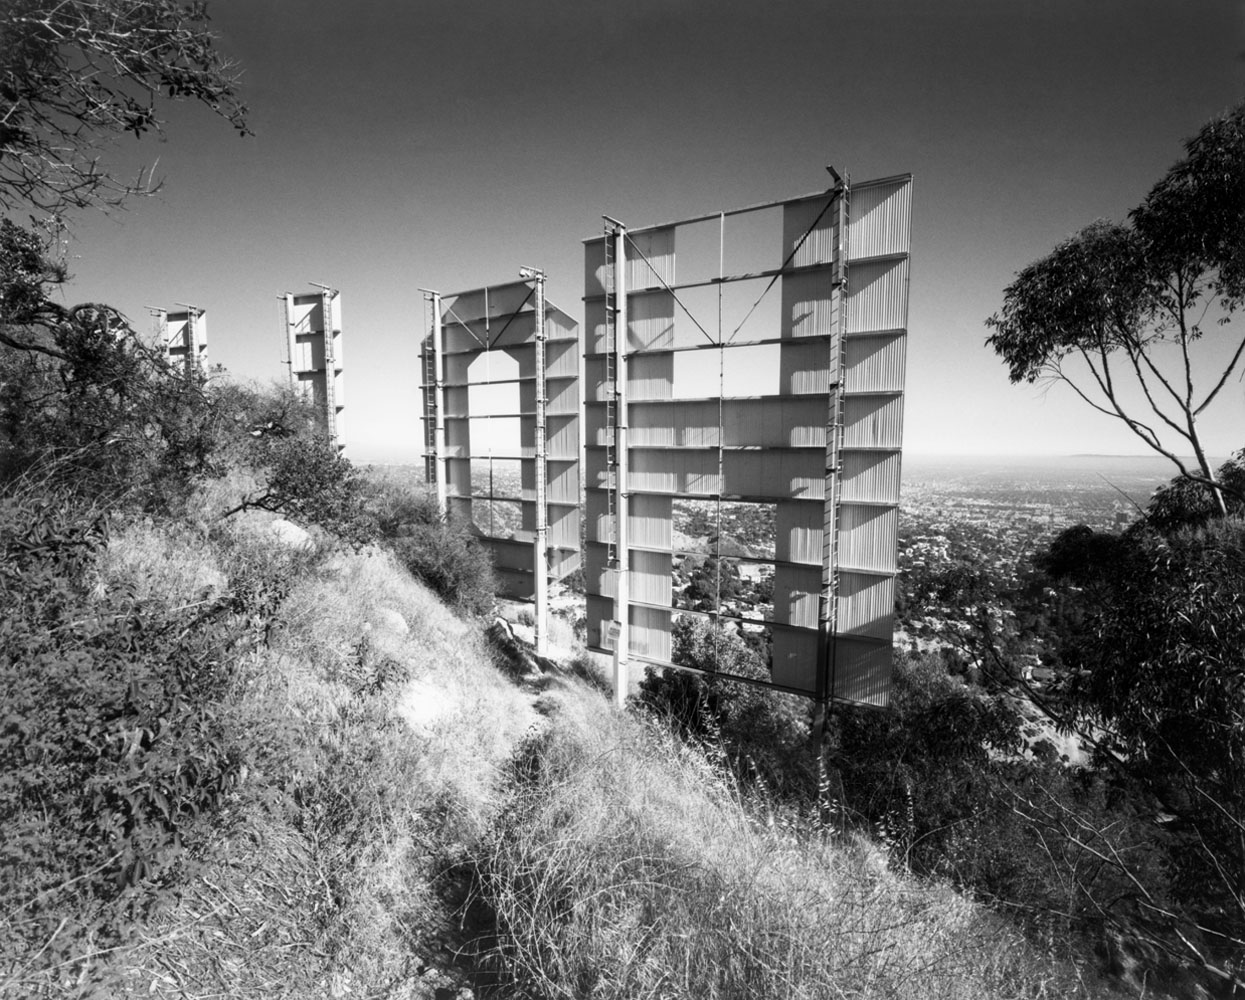 USA. Los Angeles, California. 2008. Back of Hollywood Sign.Contact email:New York : photography@magnumphotos.comParis : magnum@magnumphotos.frLondon : magnum@magnumphotos.co.ukTokyo : tokyo@magnumphotos.co.jpContact phones:New York : +1 212 929 6000Paris: + 33 1 53 42 50 00London: + 44 20 7490 1771Tokyo: + 81 3 3219 0771Image URL:http://www.magnumphotos.com/Archive/C.aspx?VP3=ViewBox_VPage&IID=2K7O3RTV98EL&CT=Image&IT=ZoomImage01_VForm